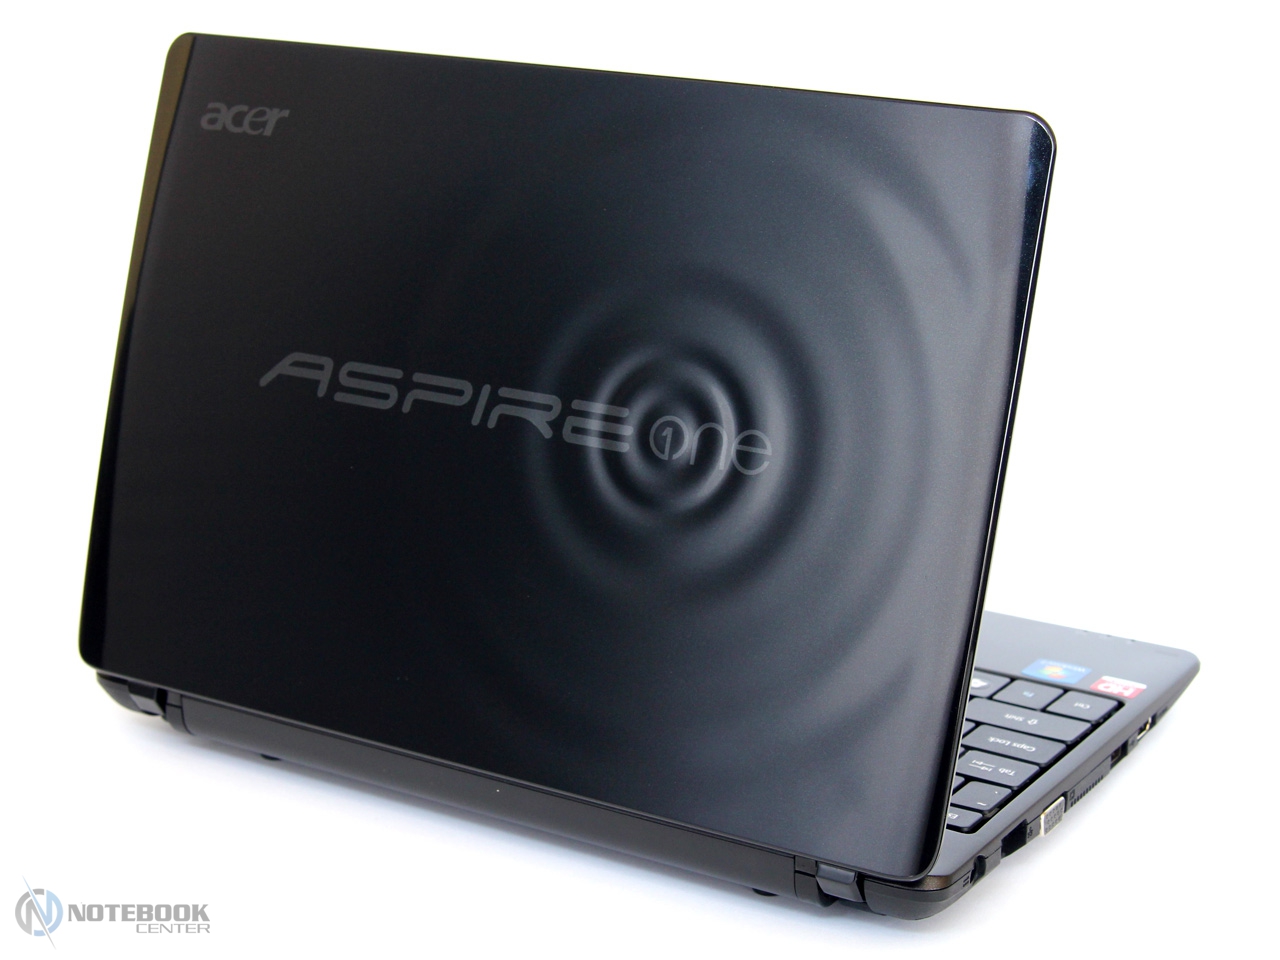  2 |   Acer Aspire One 722